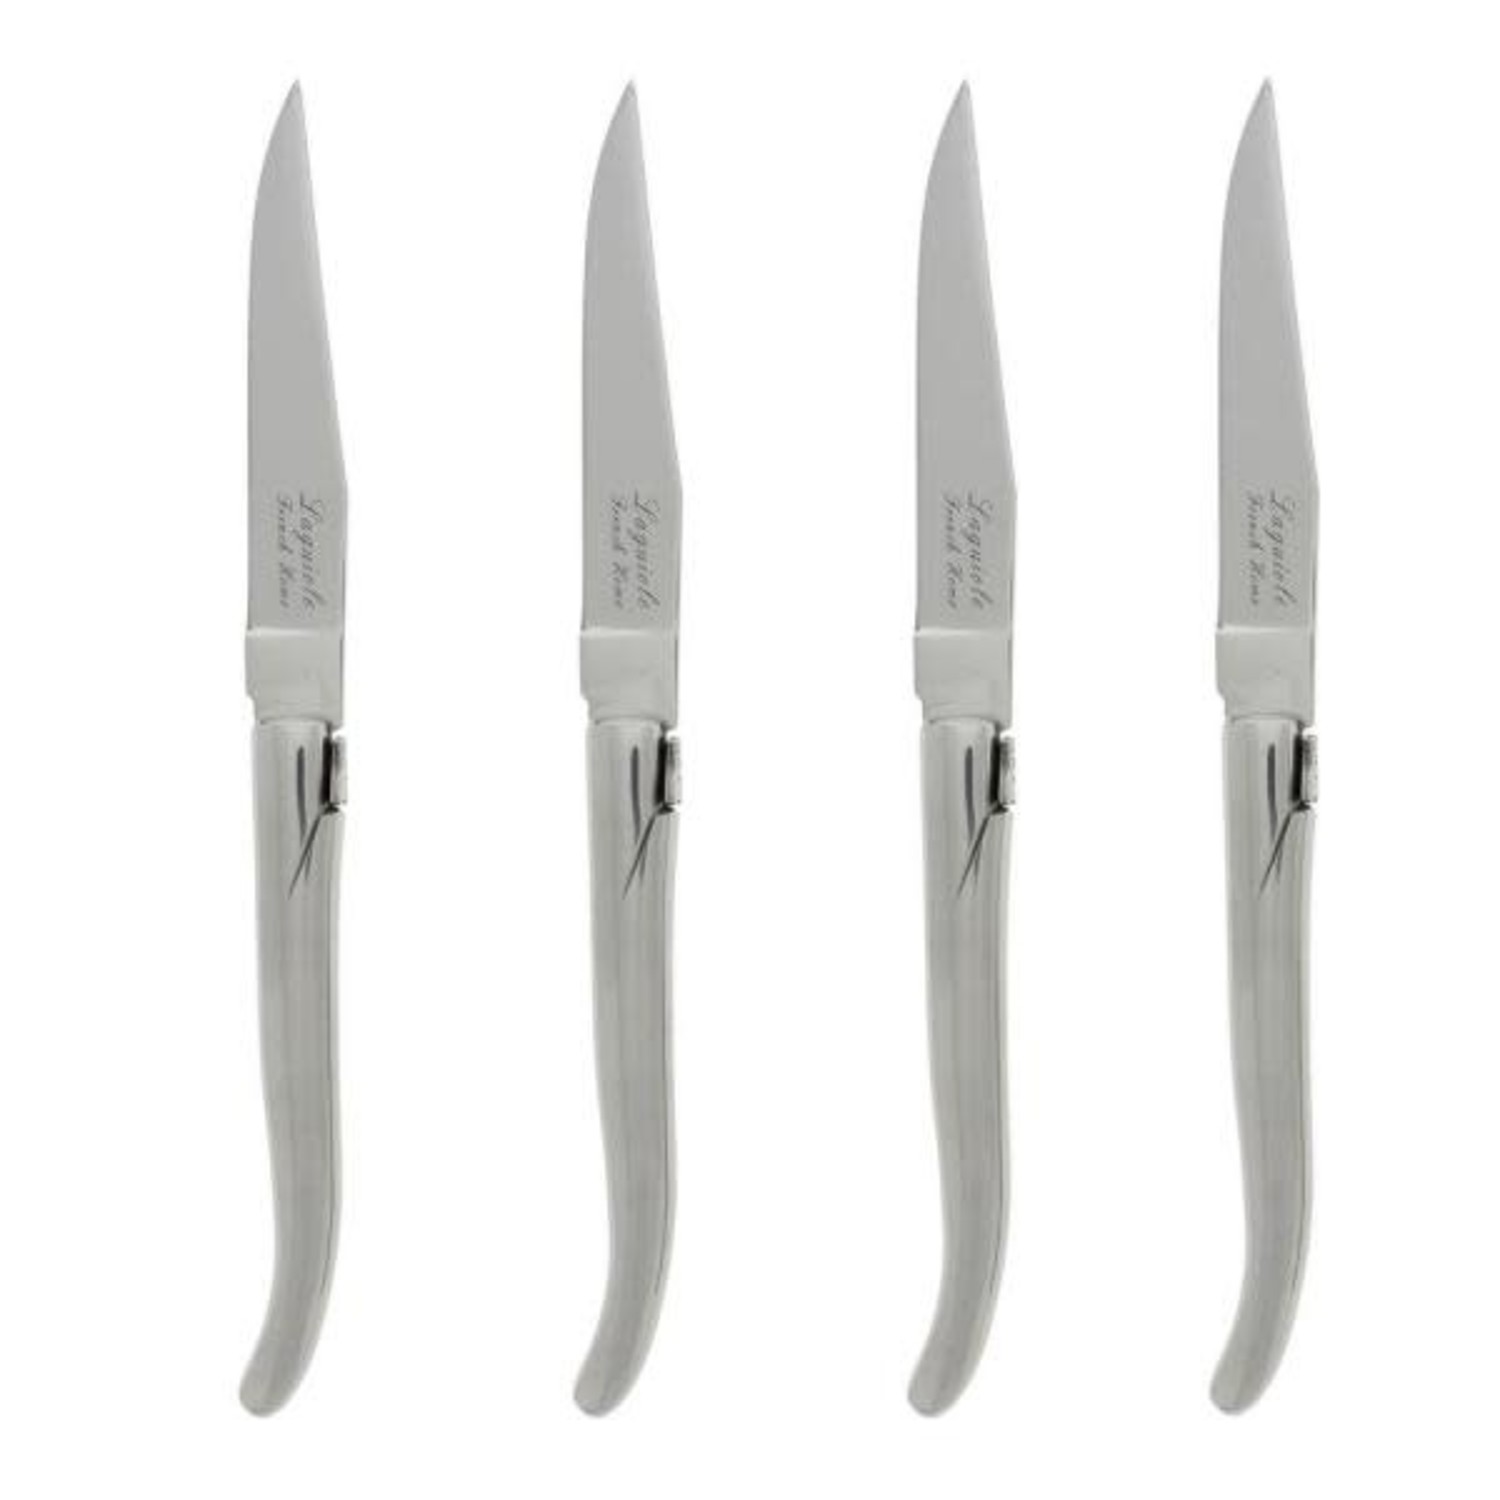 Cookit 6Pcs Steak Knife Set Serrated Stainless Steel Utility with Wooden  Handle for Home Dining Restaurant